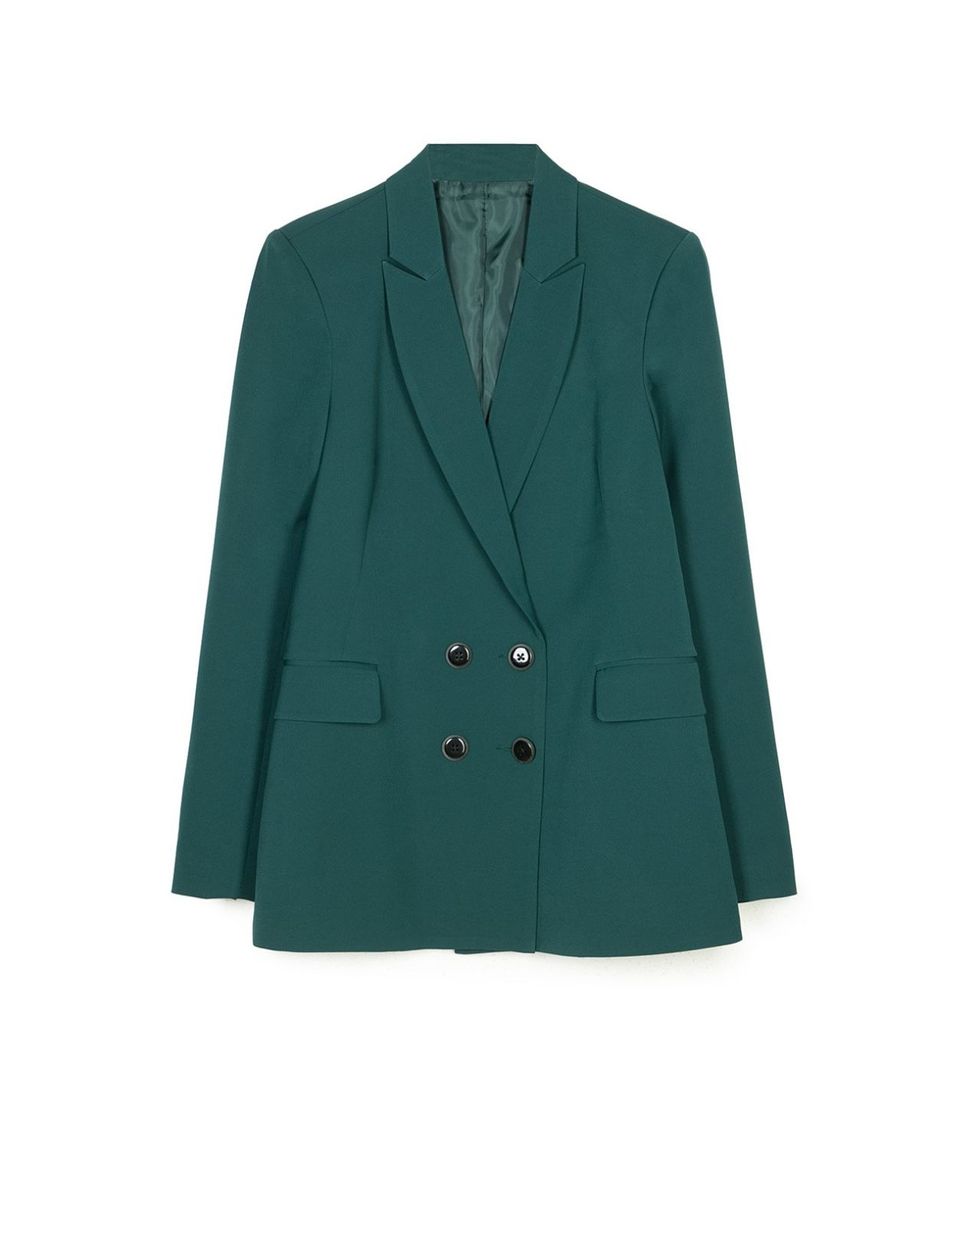 Clothing, Outerwear, Blazer, Jacket, Green, Suit, Button, Turquoise, Sleeve, Formal wear, 